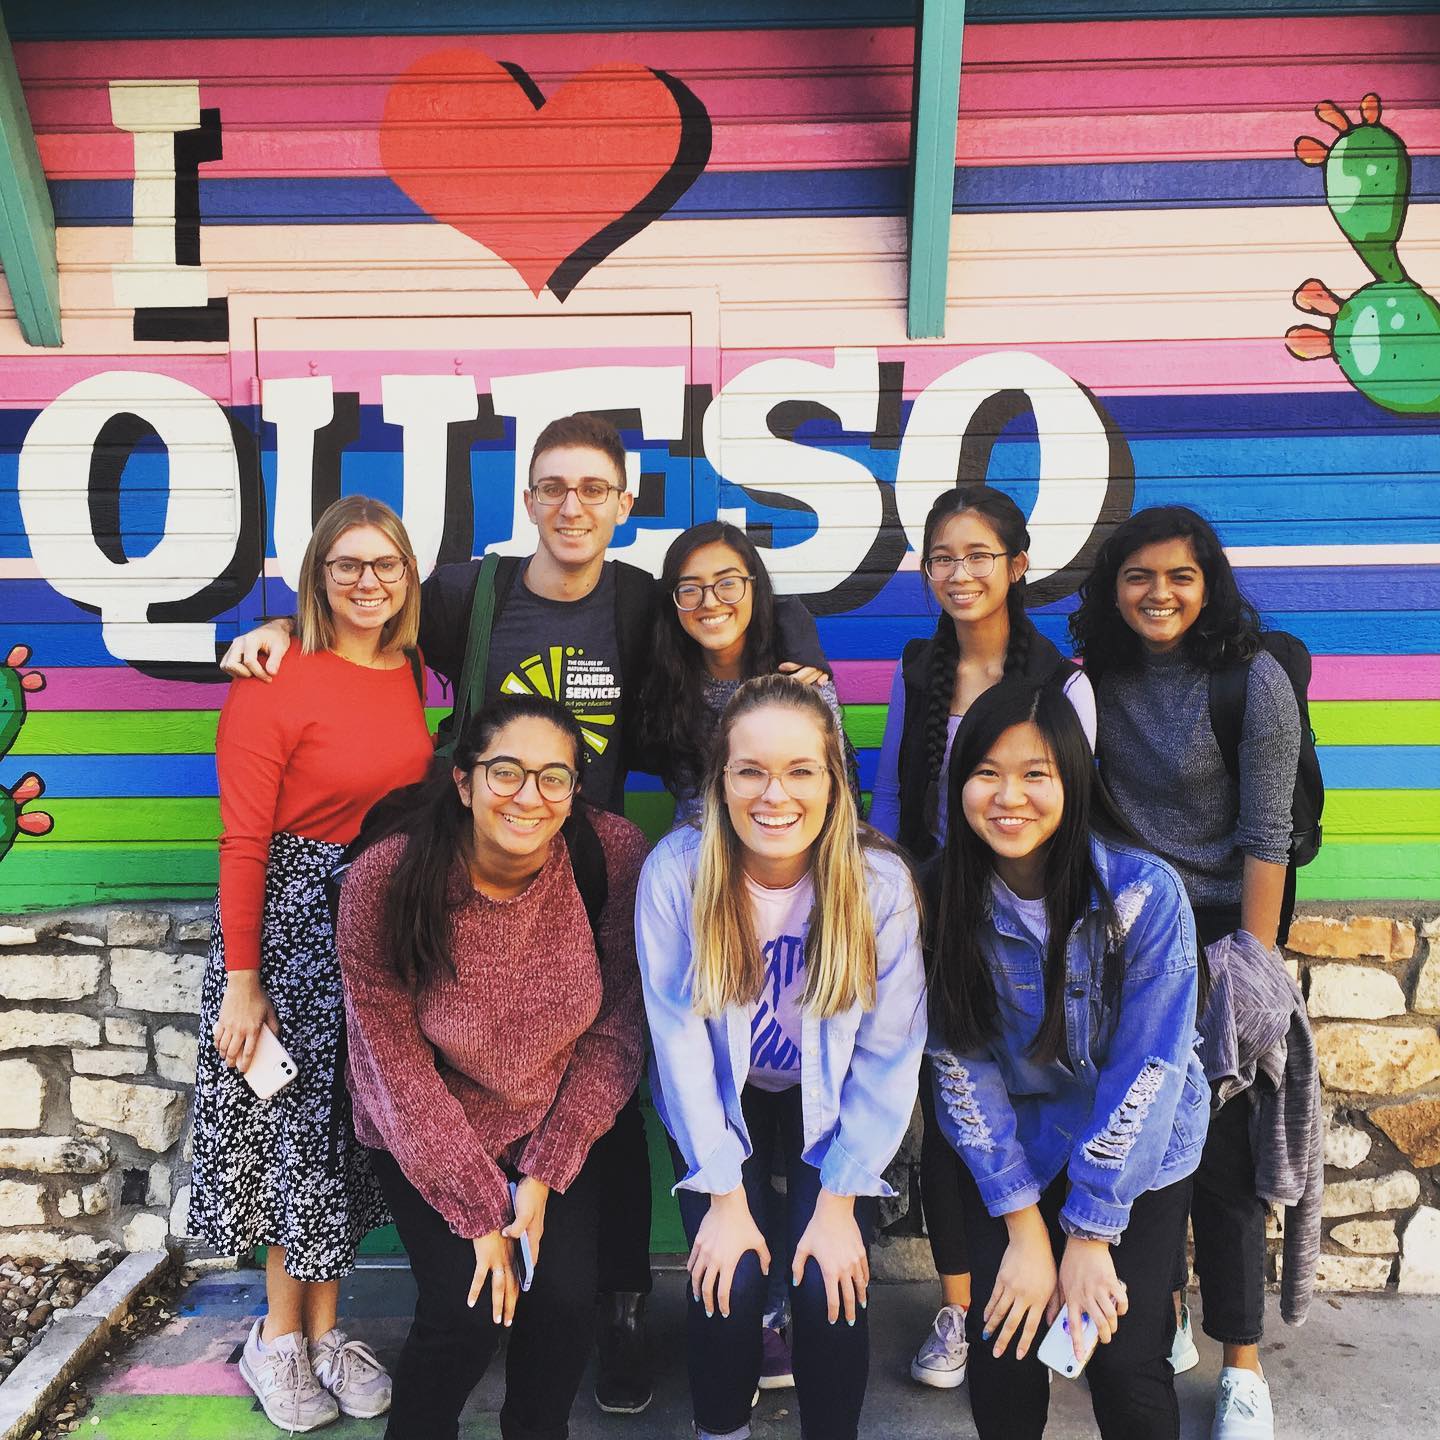 8 college students in front of "I love queso" mural